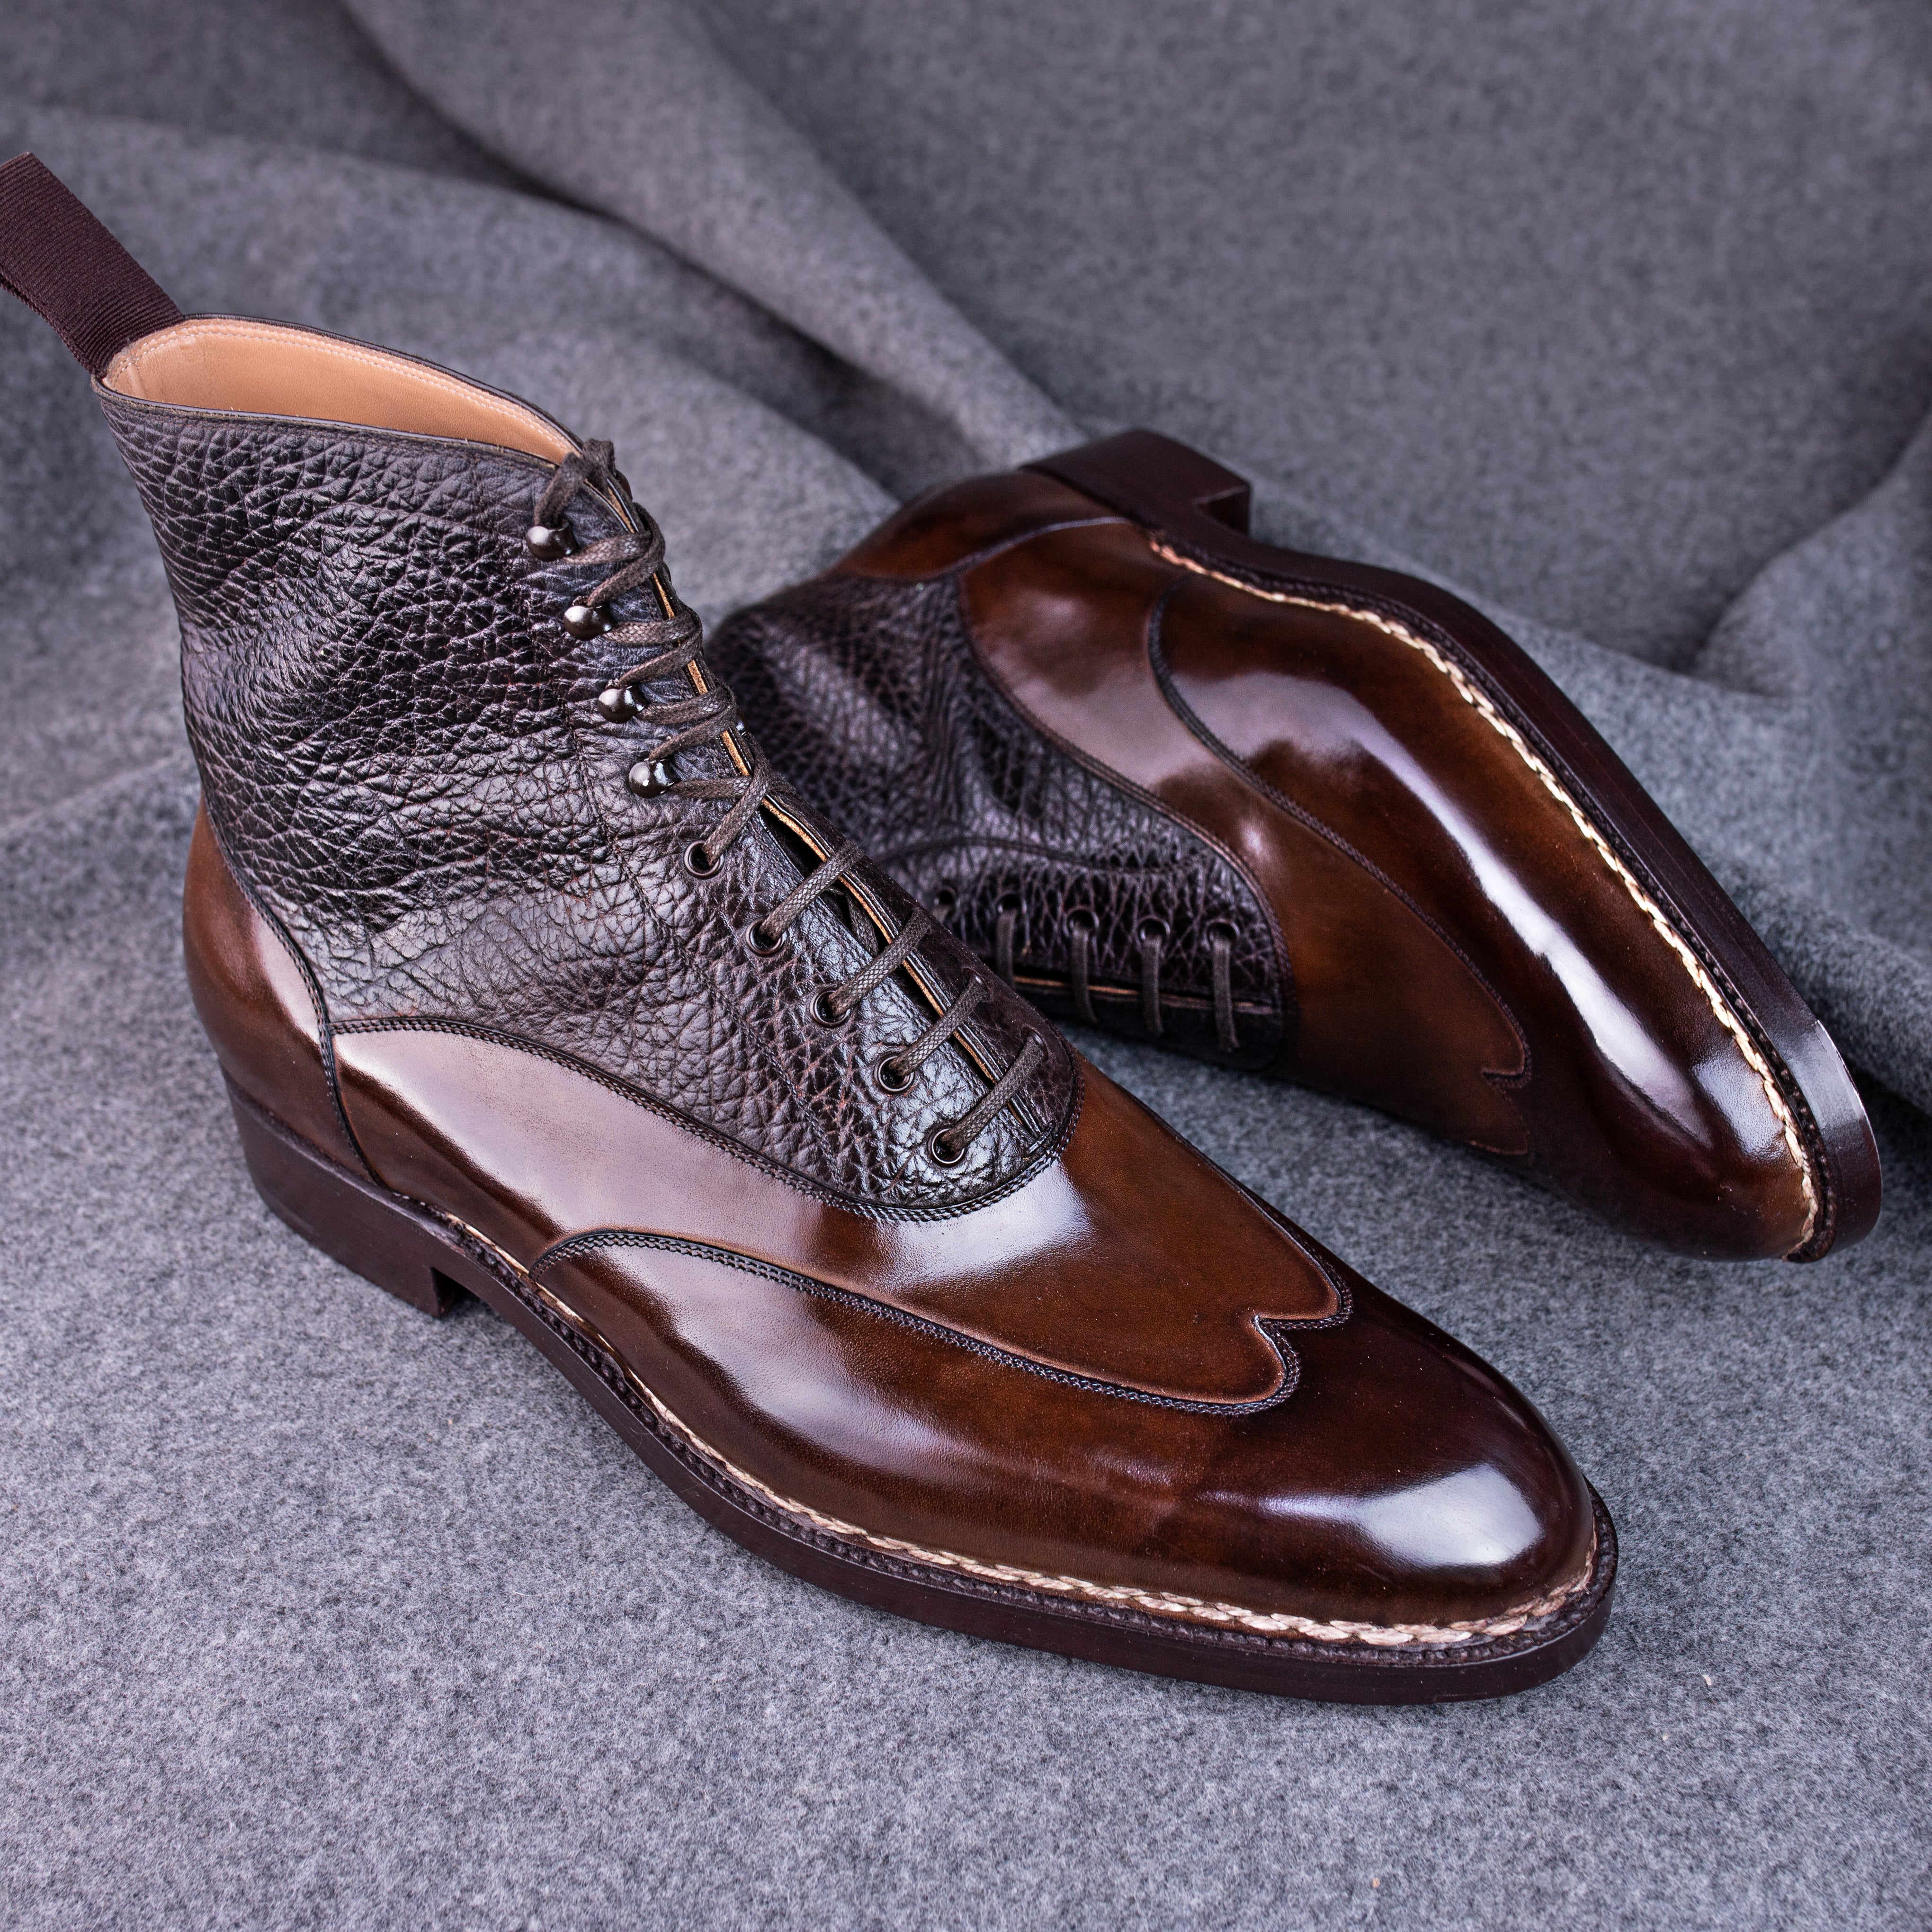 High cut boot, long wing tip with middle tulip cut – Saint Crispin's